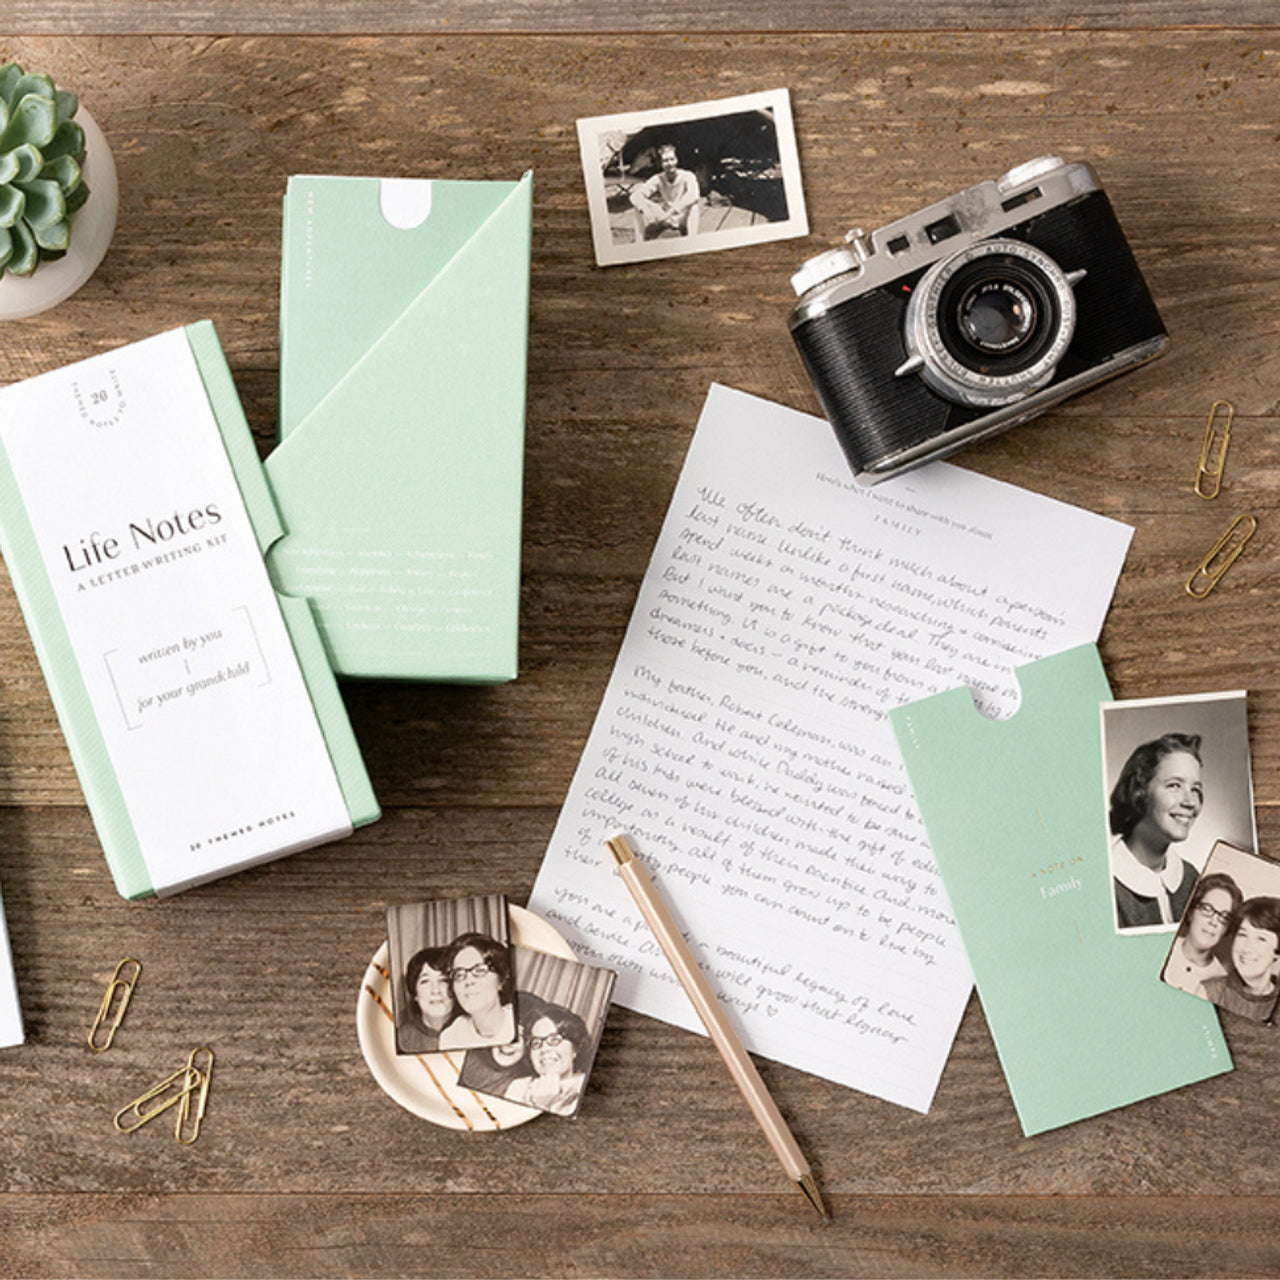 Life Notes- A Letter-Writing Kit Written by You for Your Grandchild